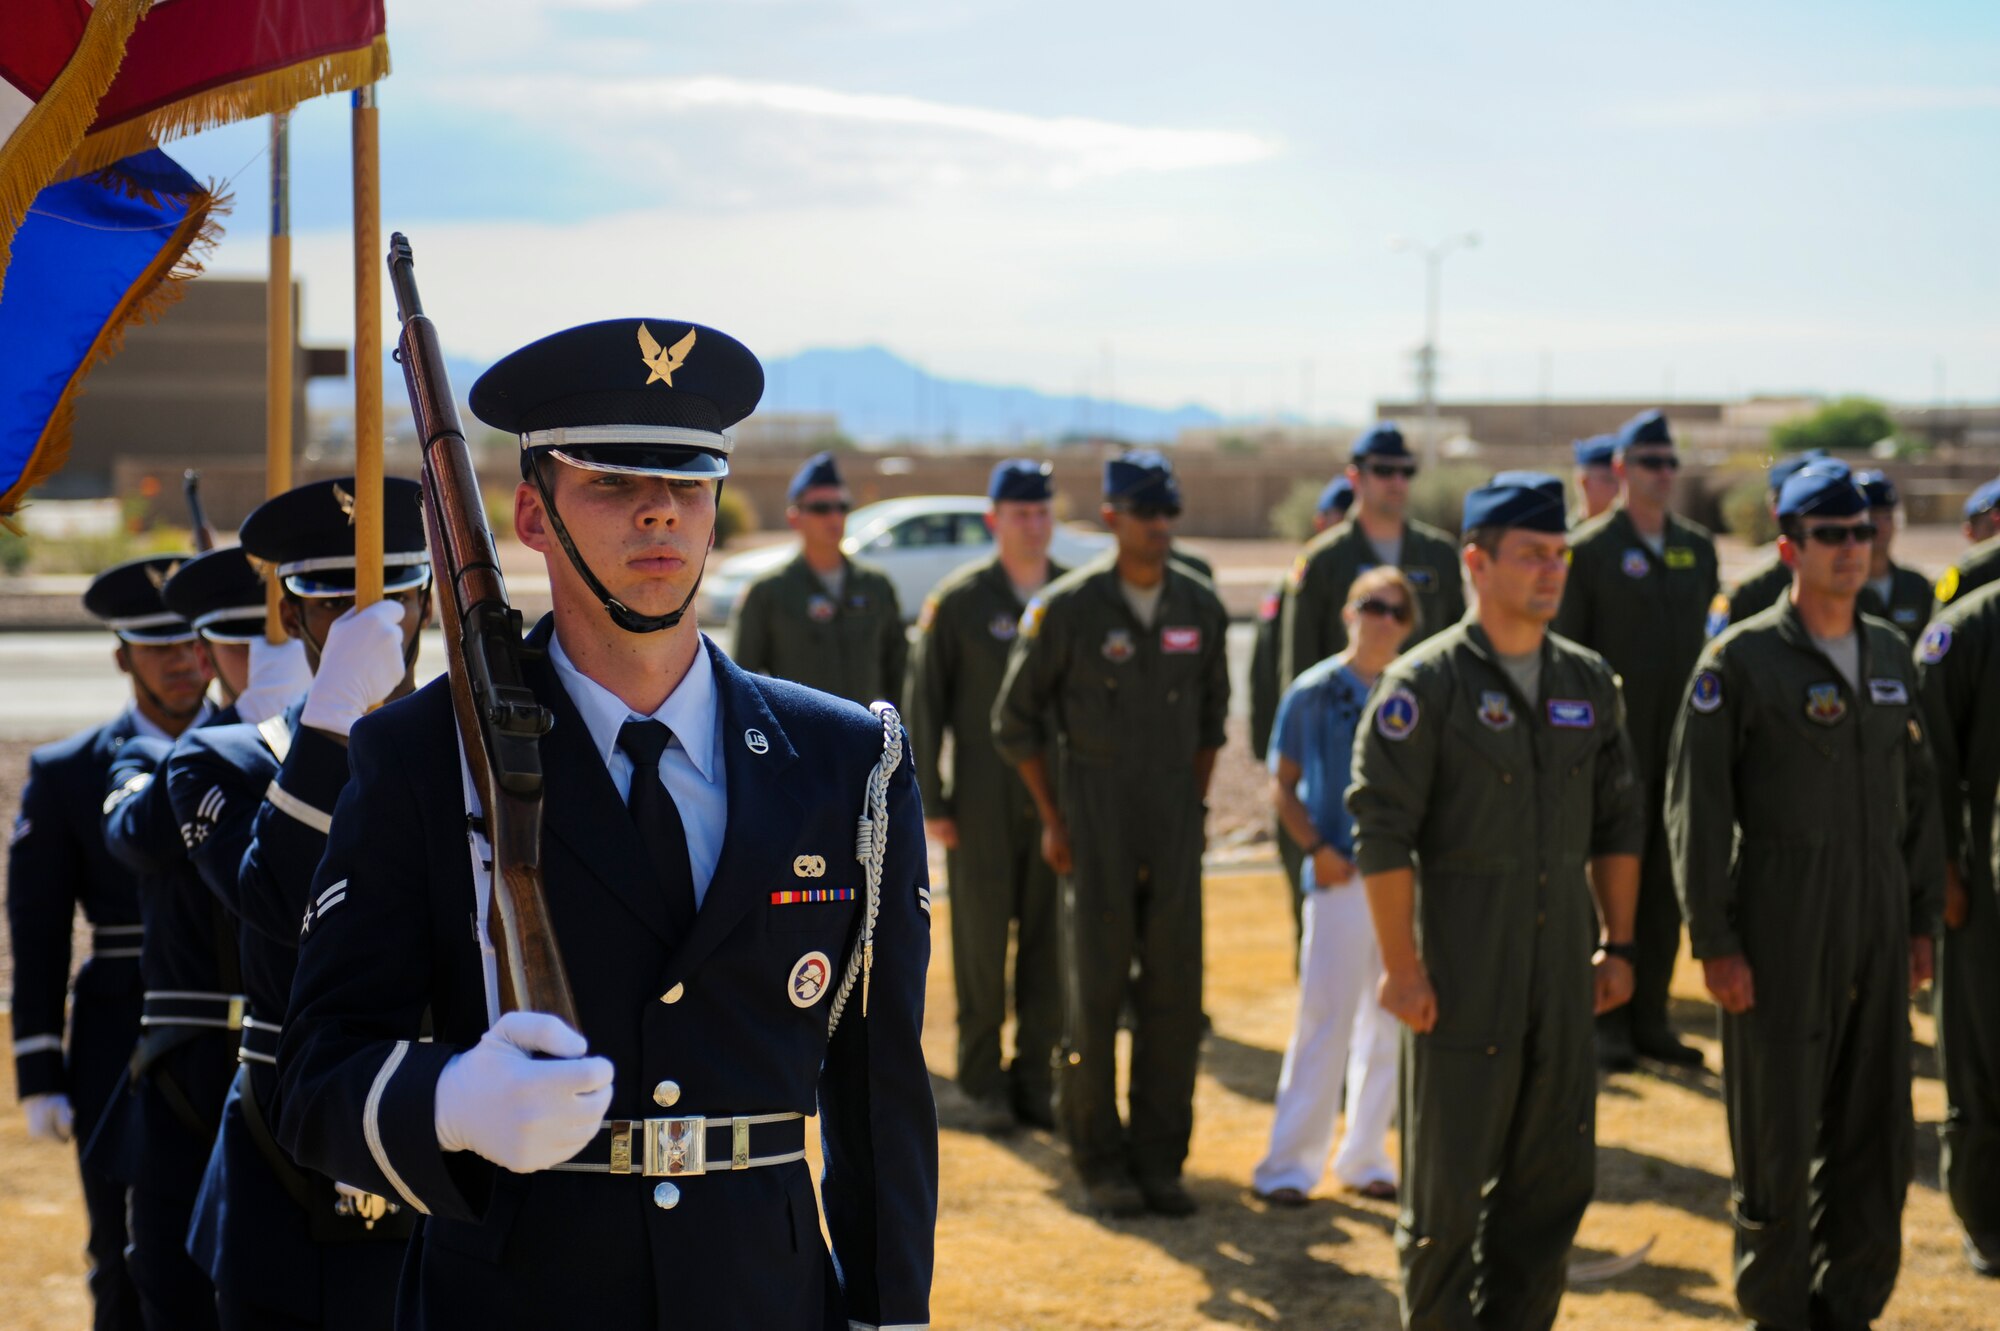 U.S. Air Force Honor Guardsmen prepare to present the colors during the opening ceremony of the 2014 Hawgsmoke Competition at Davis-Monthan Air Force Base, Ariz., July 9, 2014. Hawgsmoke is a biennial U.S. Air Force bombing, missile, and tactical gunnery competition for A-10 Thunderbolt II units. (U.S. Air Force photo by Airman 1st Class Sivan Veazie/Released)